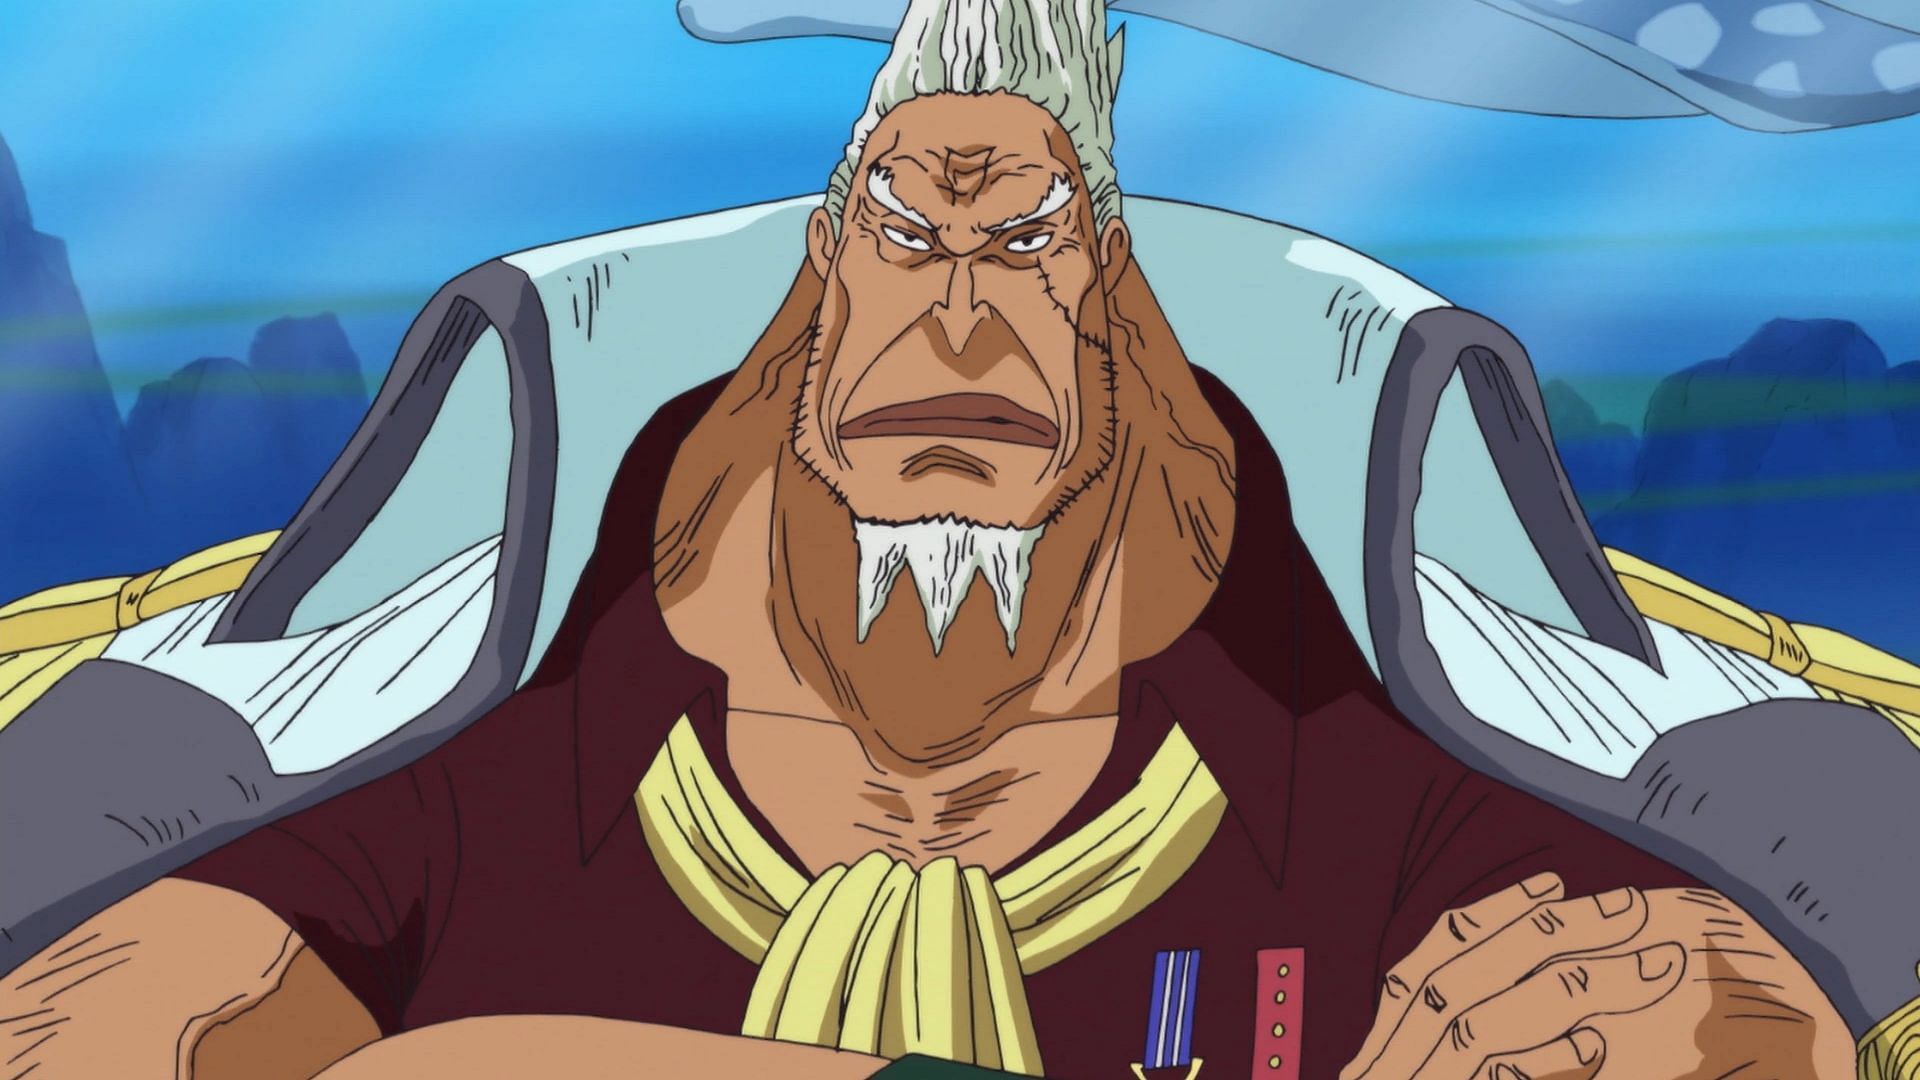 Kong as seen in One Piece (Image via Toei Animation, One Piece)